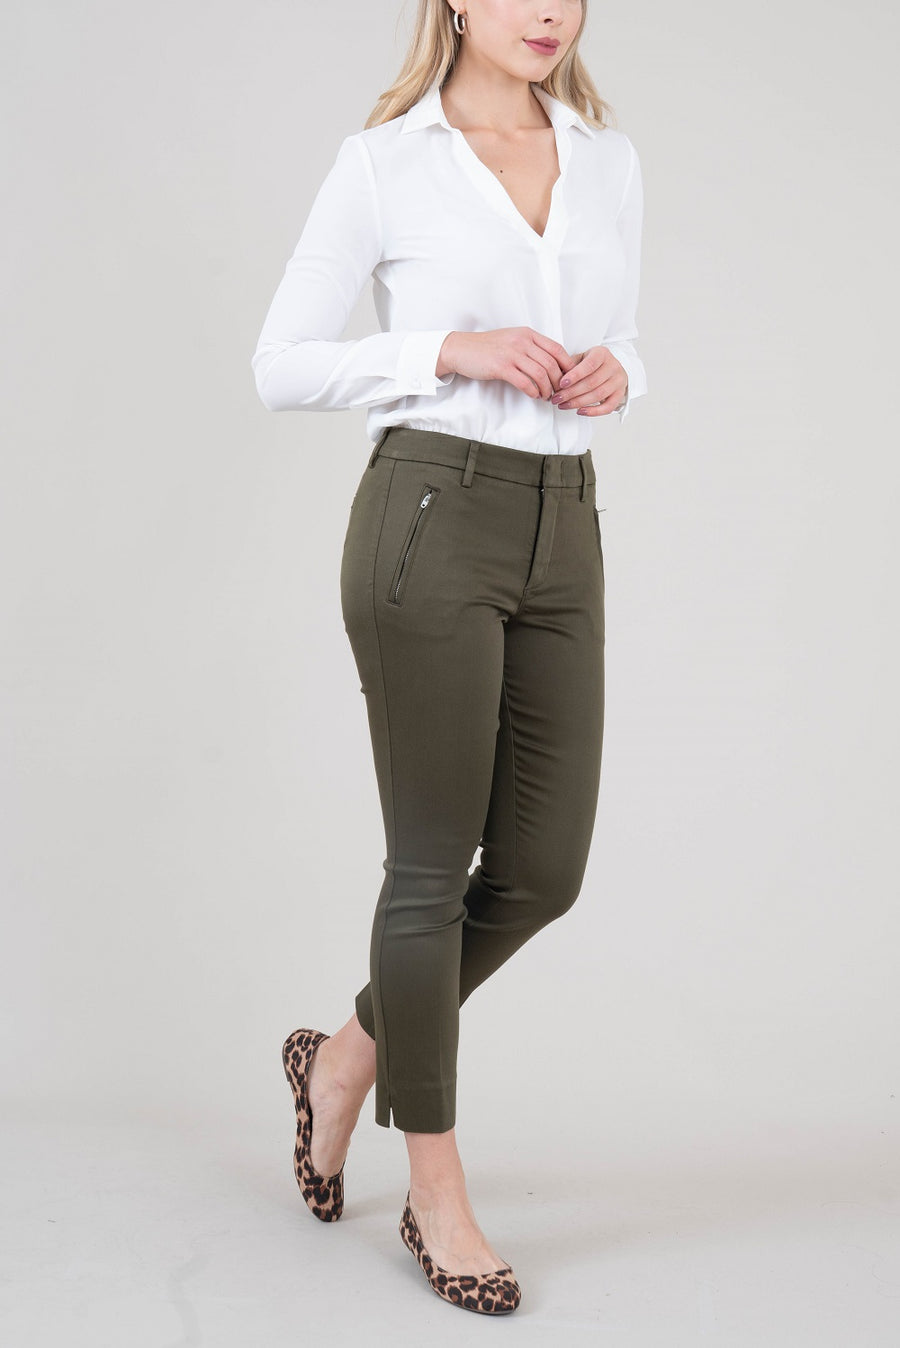 Level99 | Francis Lacey Trouser – level99jeans